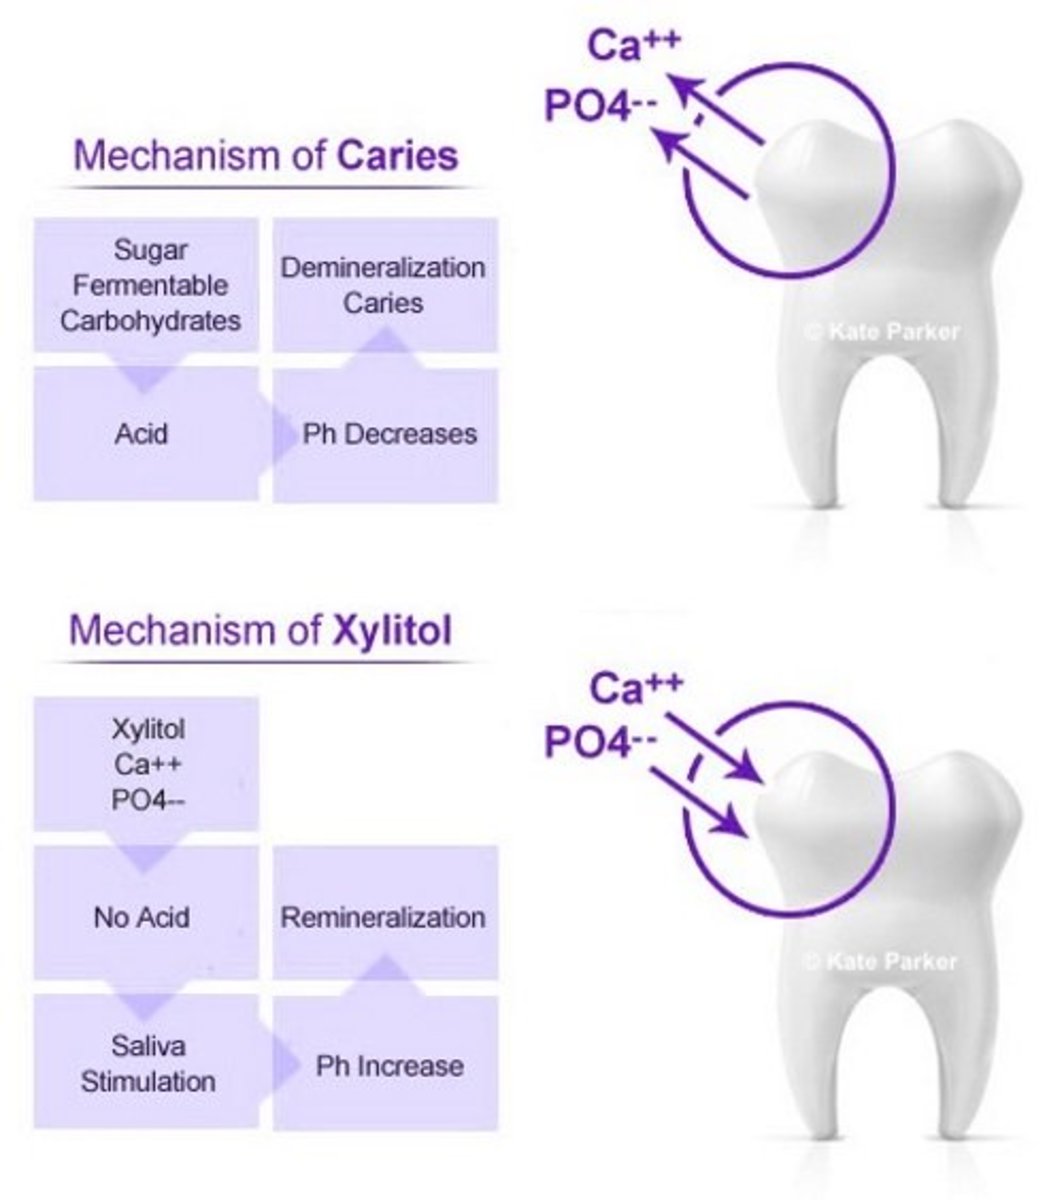 Caries vs. Xylitol